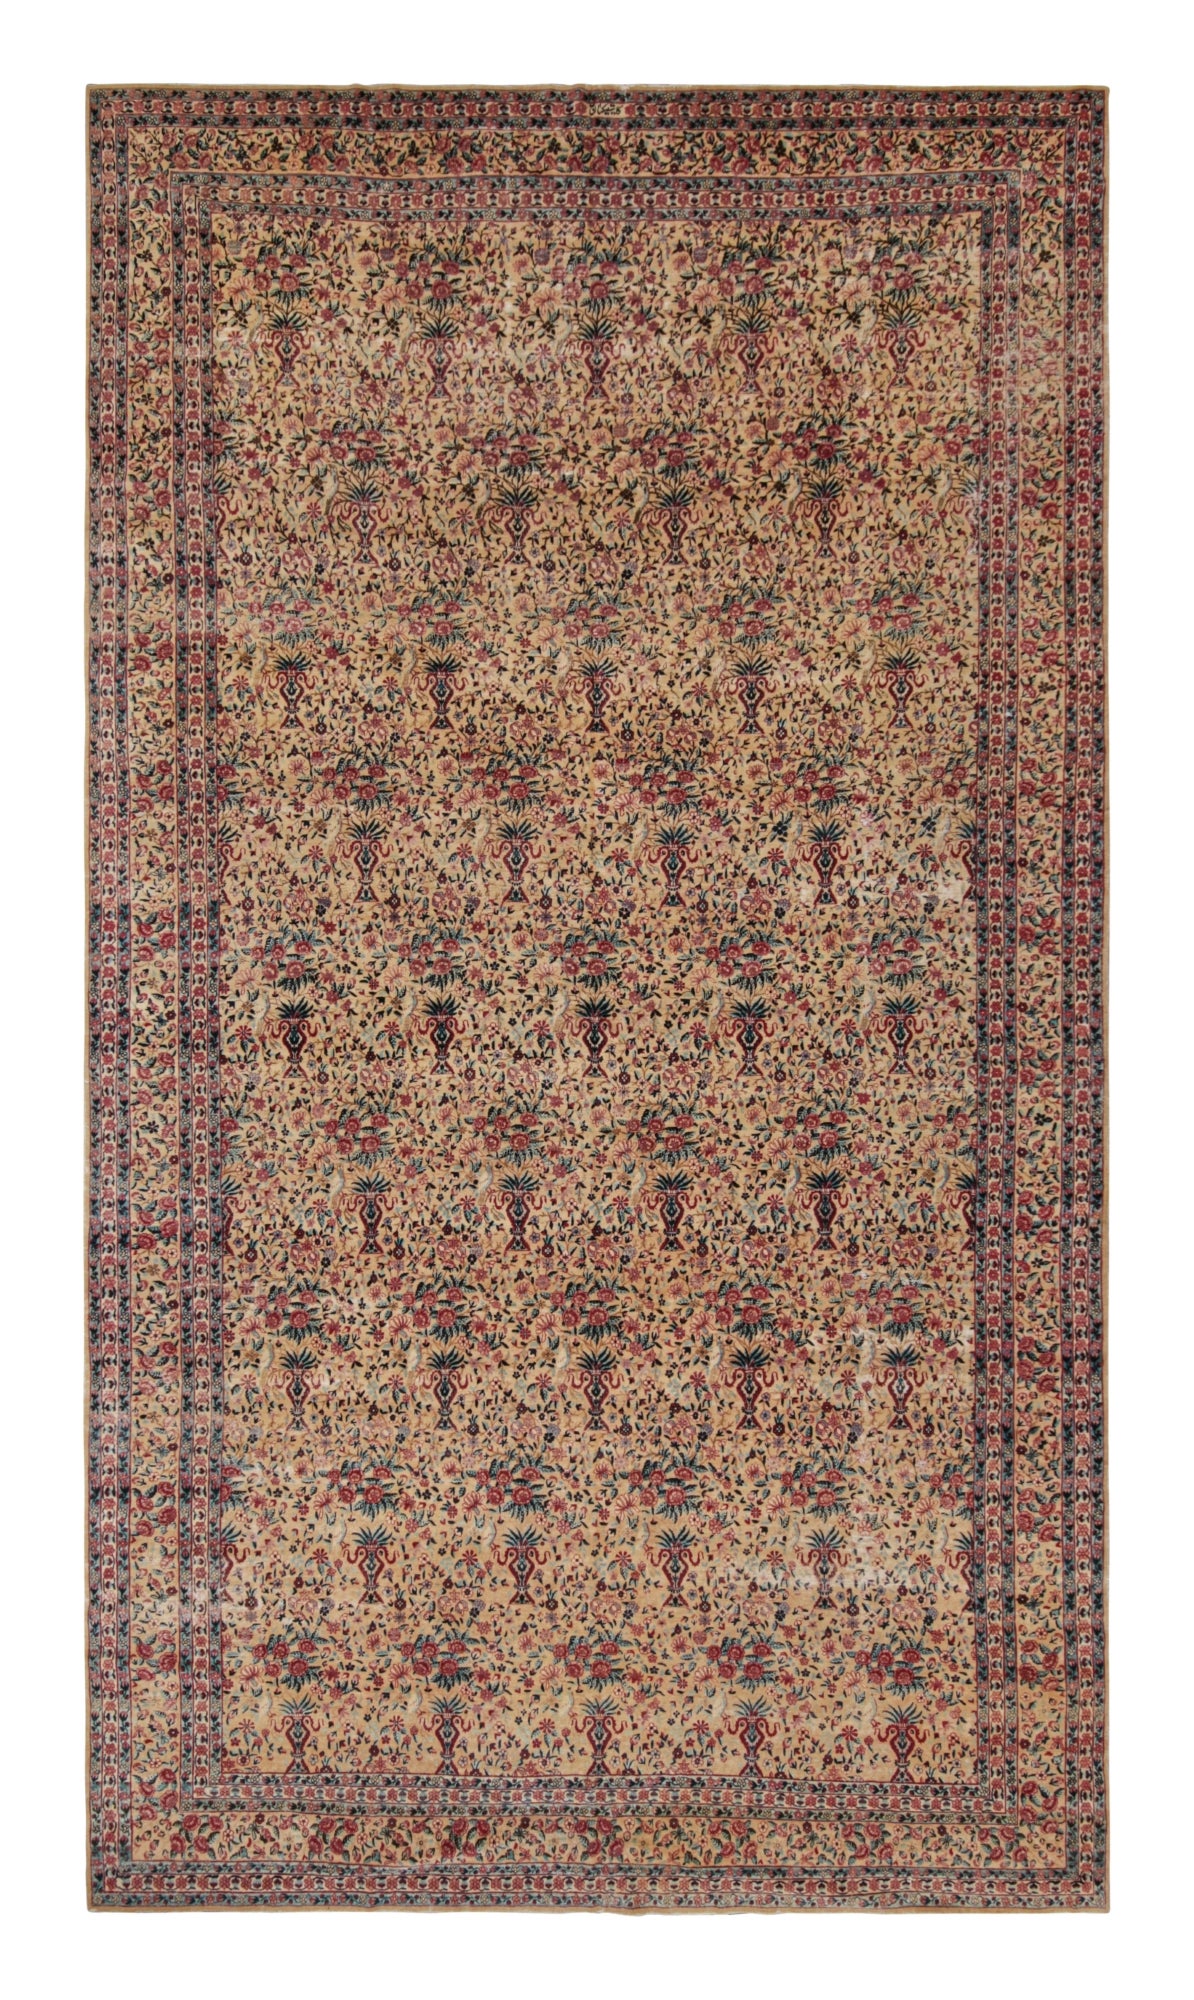 Rare Antique Kerman Lavar Persian Rug with Floral Patterns, from Rug & Kilim For Sale